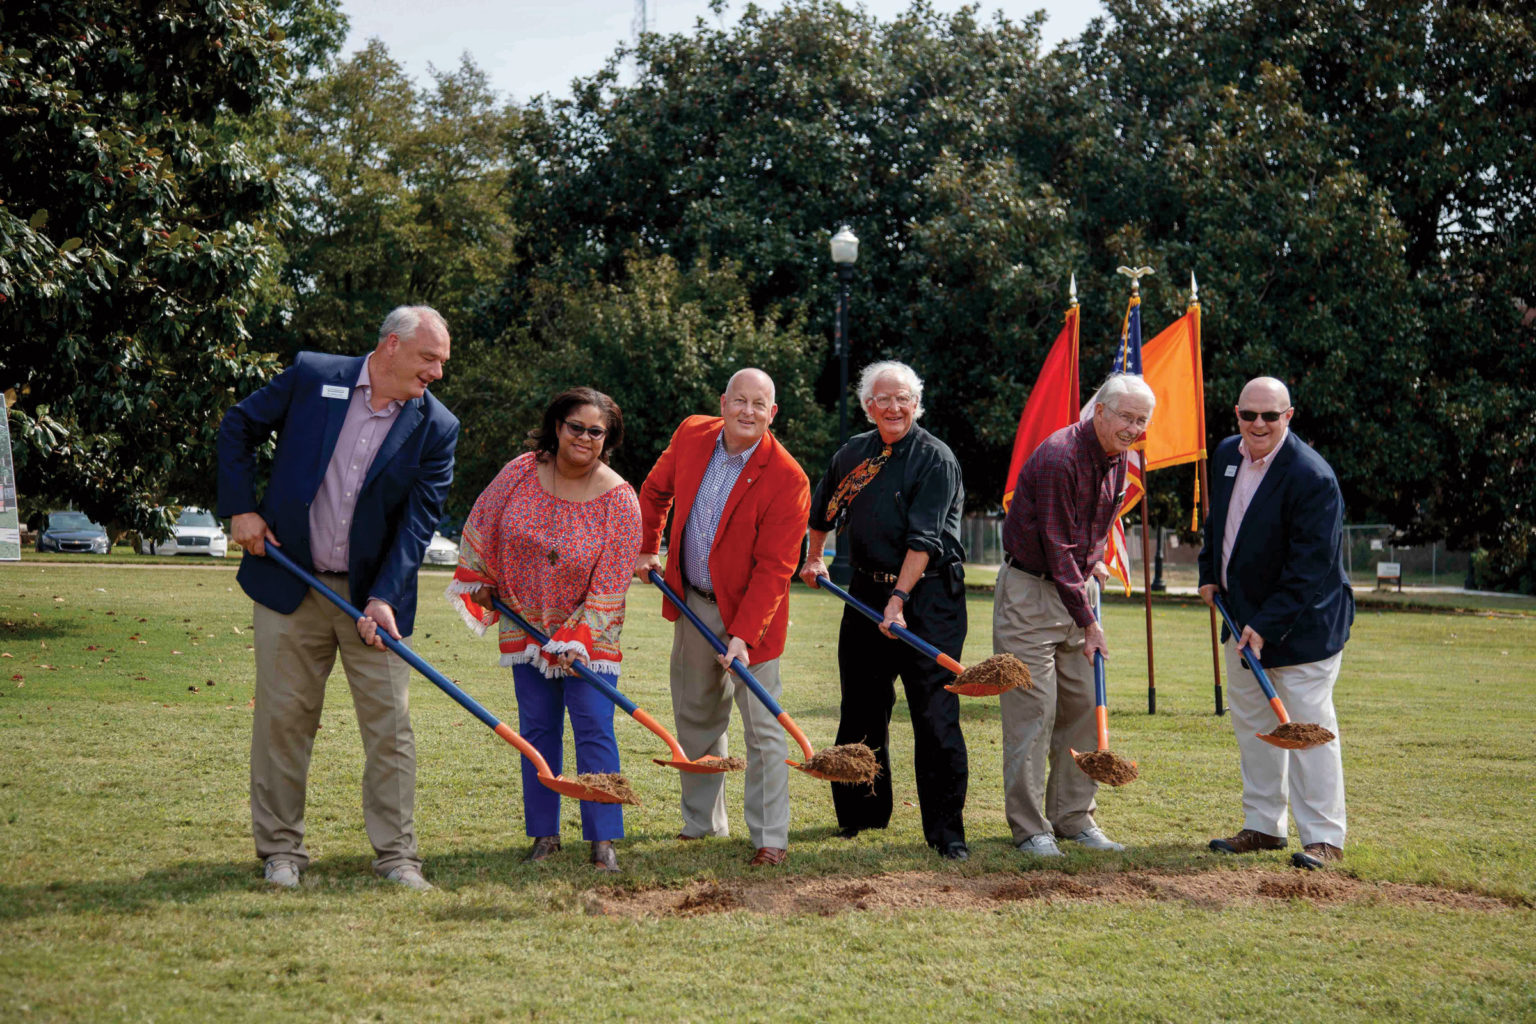 A group of people hold dirt in ceremonial blue and orange shovels at a groundbreaking